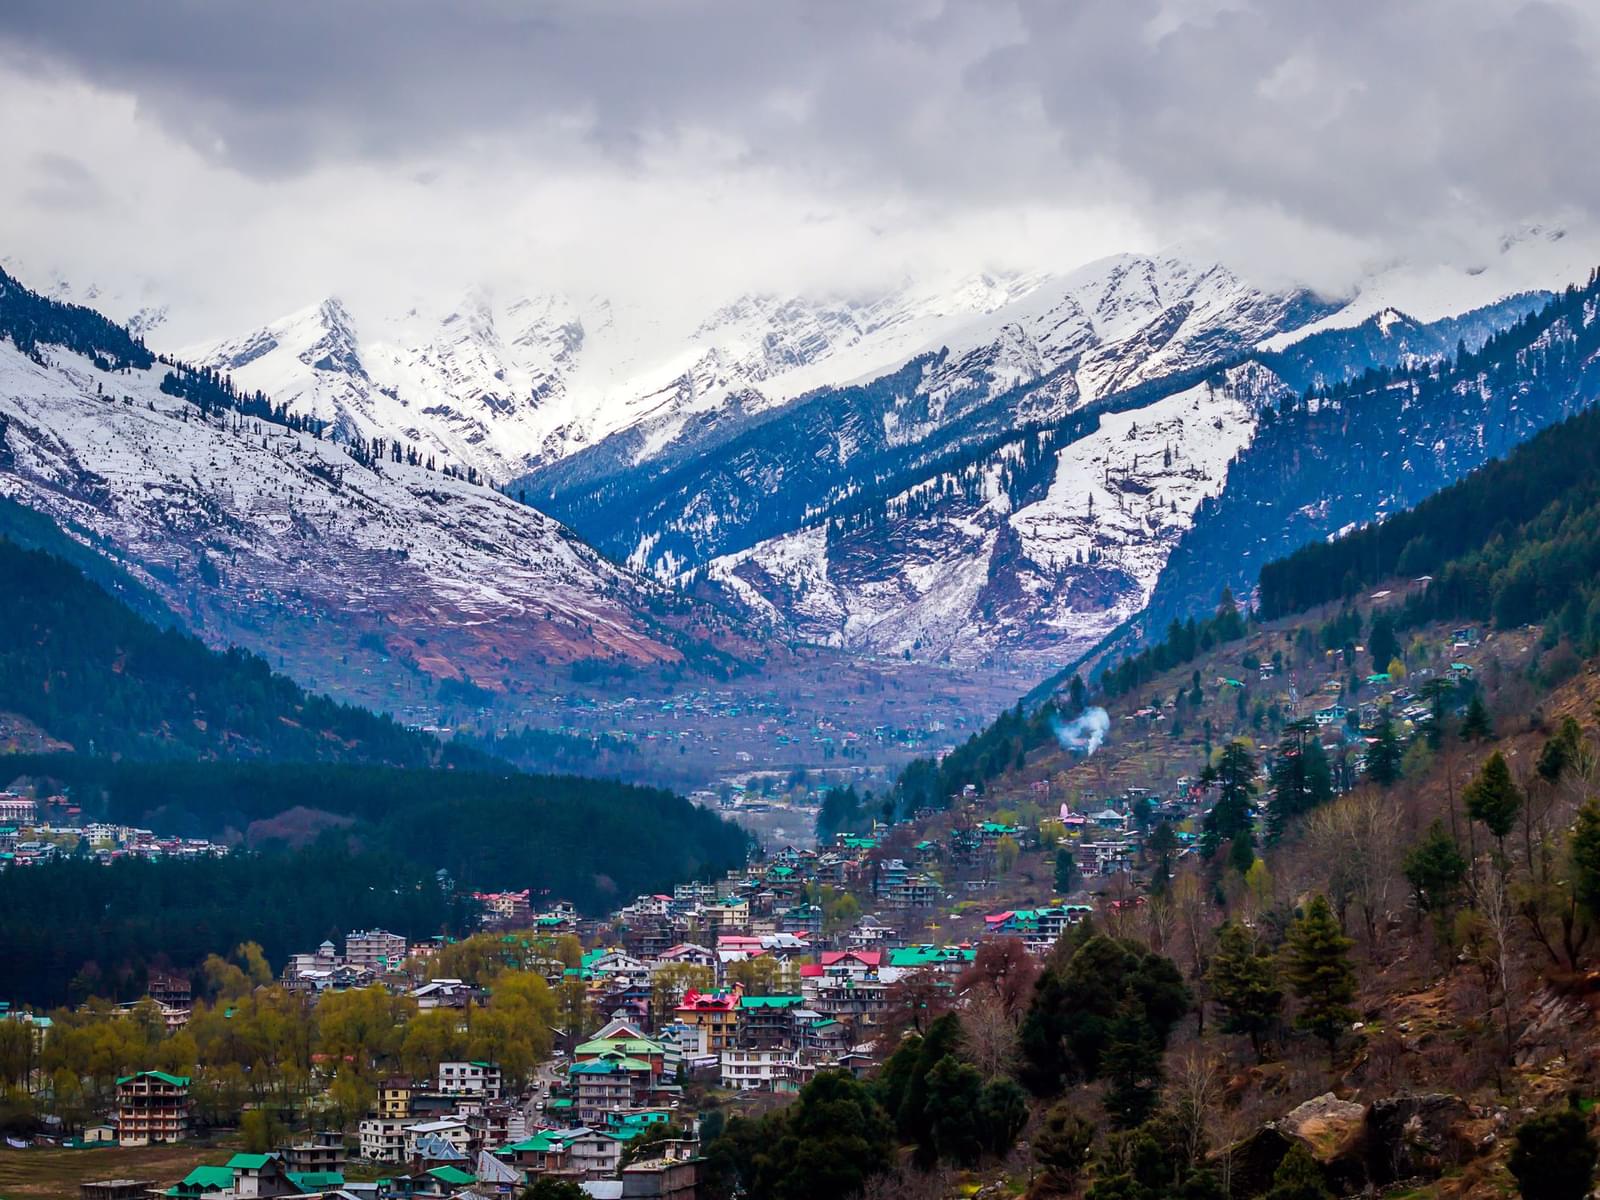 A gift of the Himalayas to the world, Manali is a beautiful township nestled in the picturesque Beas River valley.